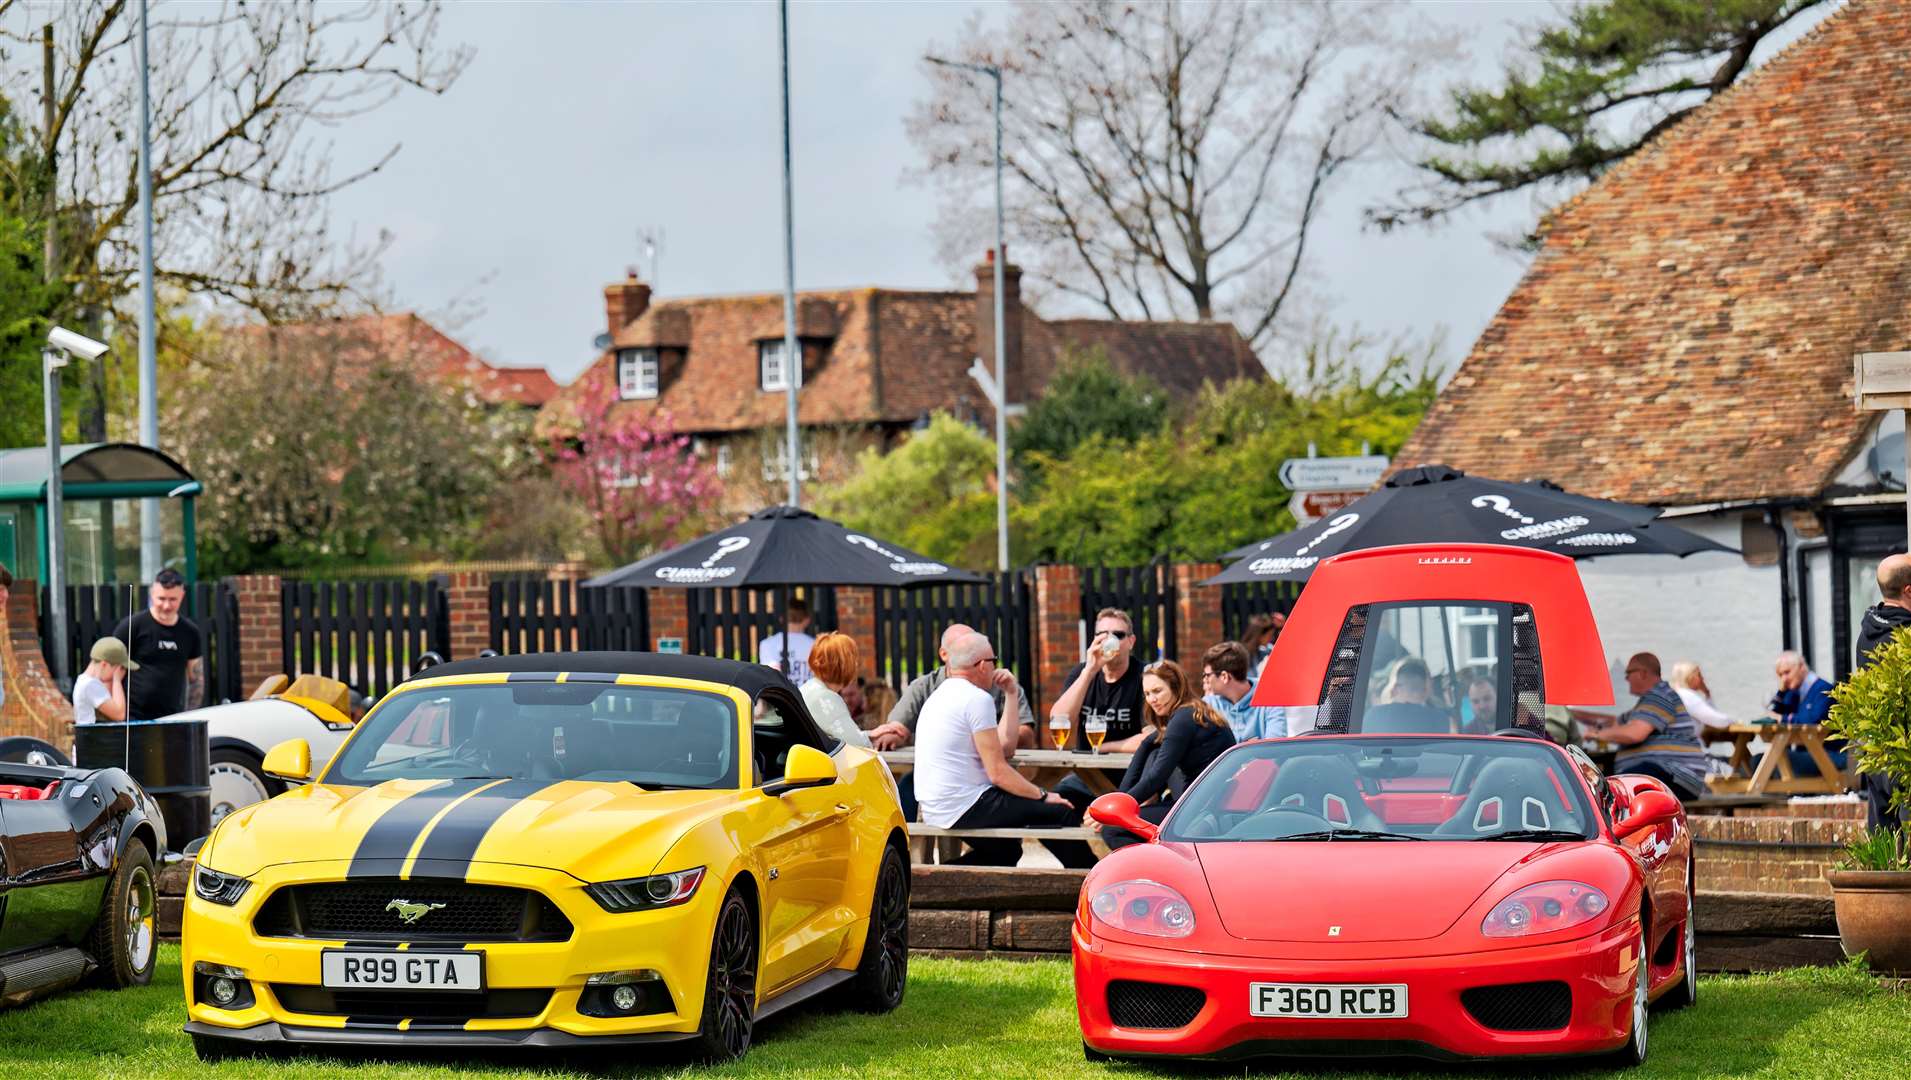 Car enthusiasts visited The Stag in Challock on opening weekend. Picture: Jason Dodd